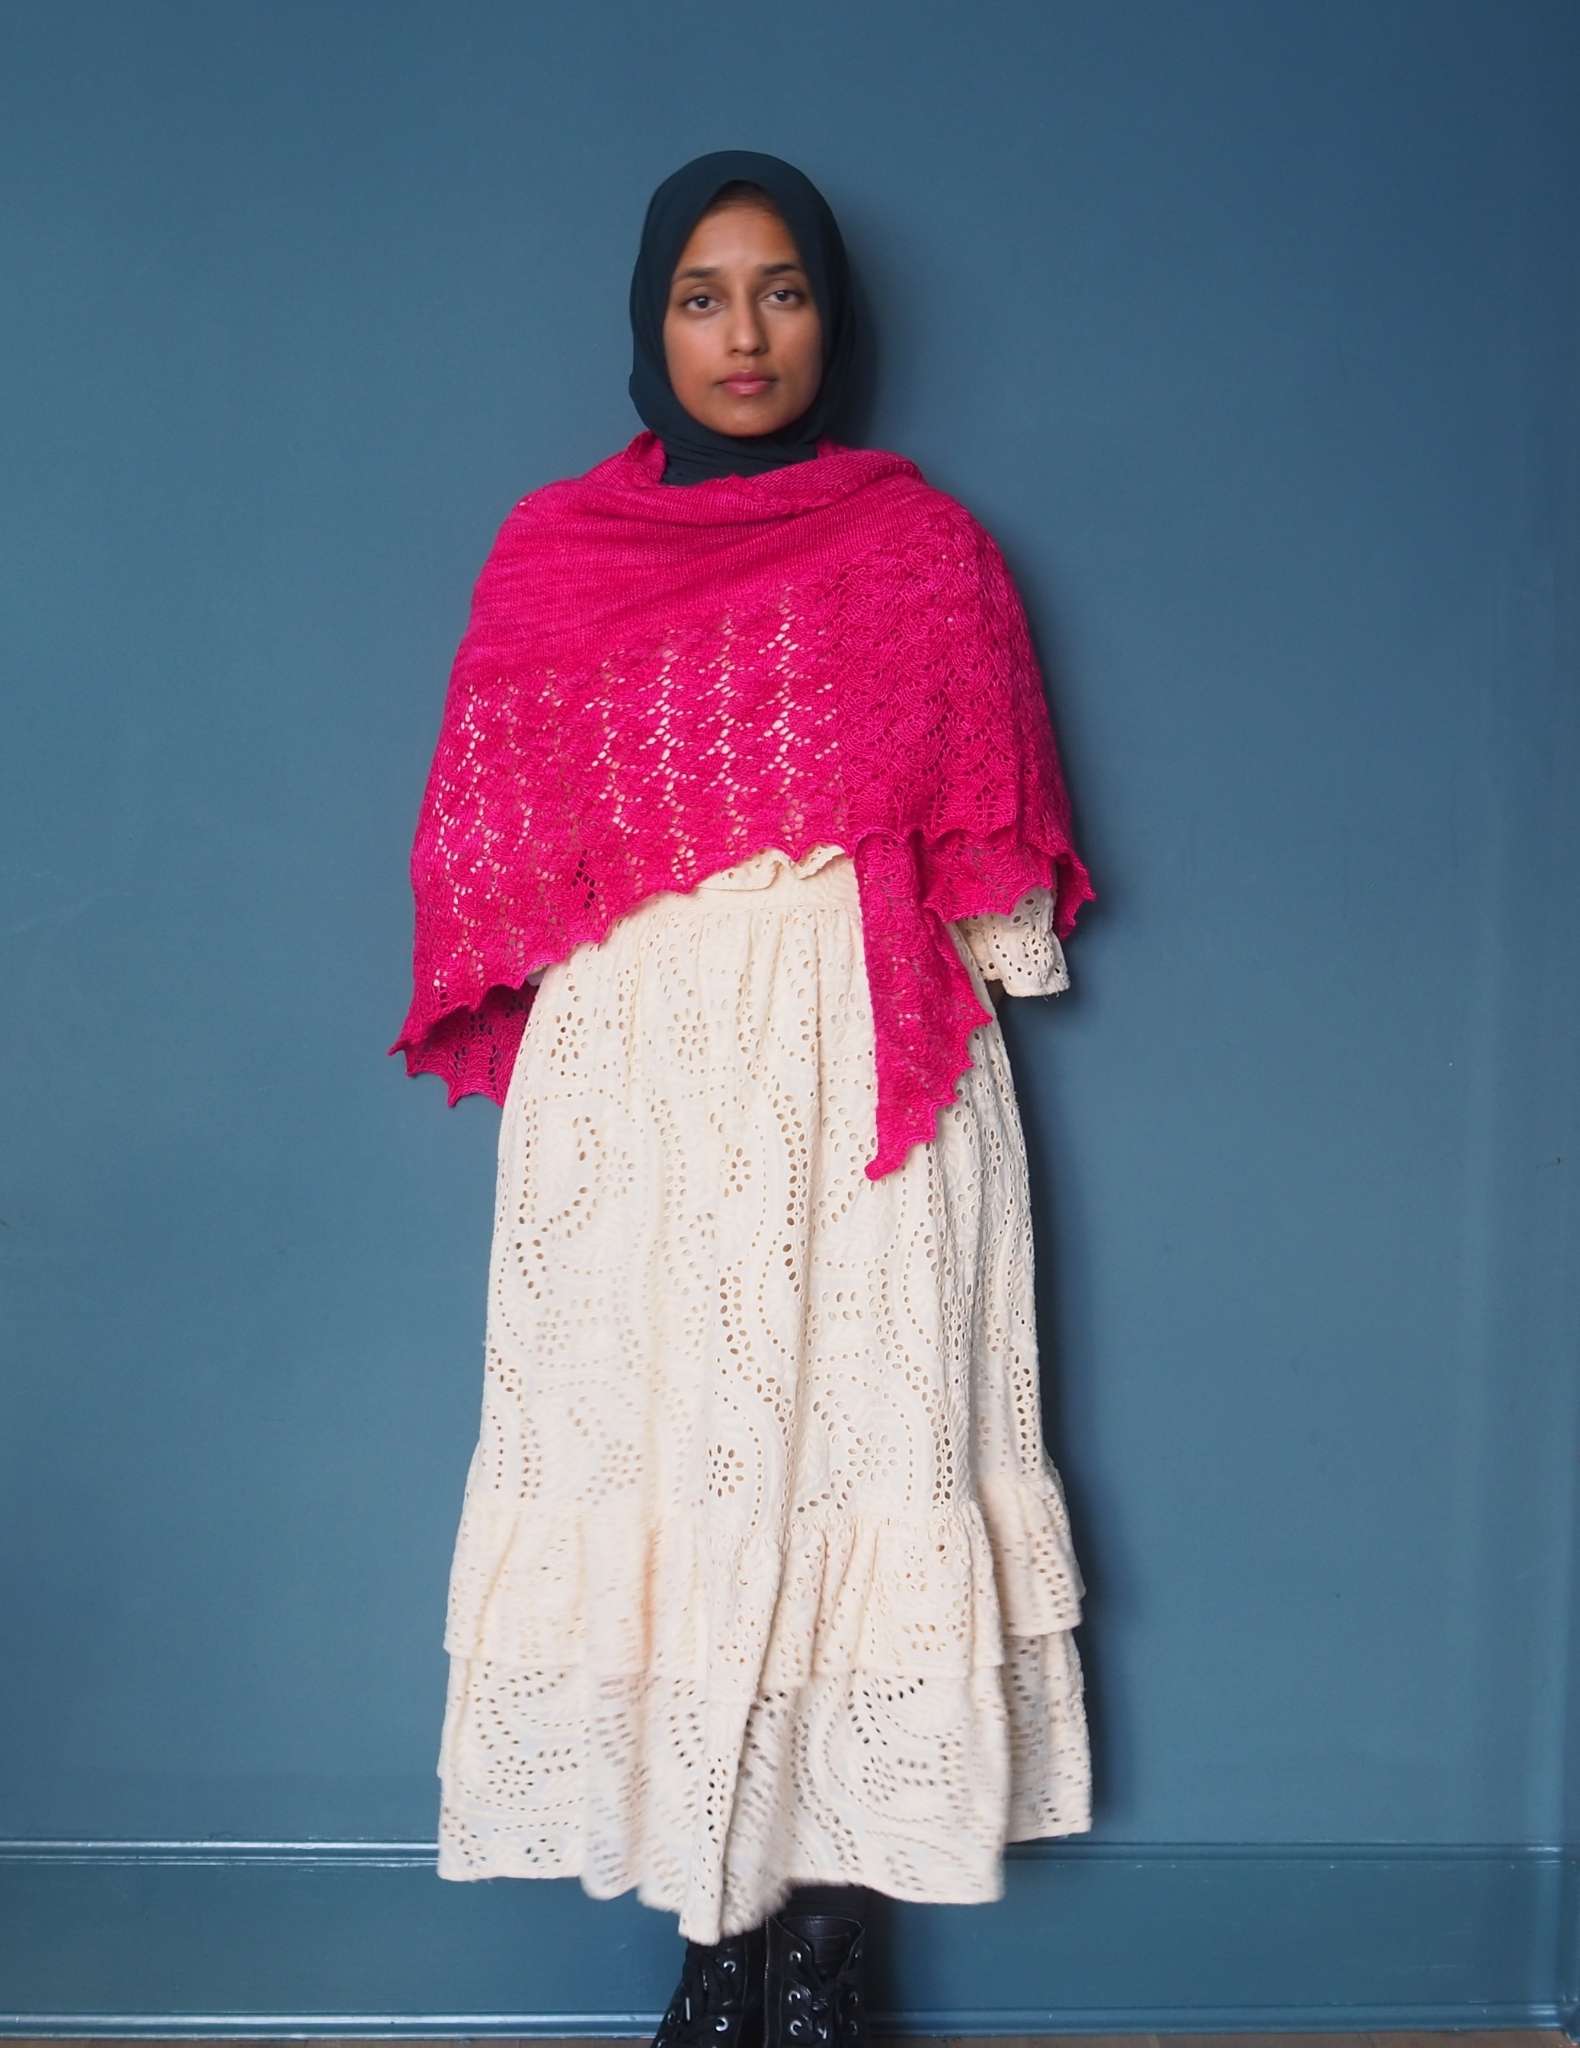 A brown woman in a hijab stands in front of a dark blue background. She is wearing a floaty cream dress with a large bright pink shawl wrapped around her shoulders and chest.